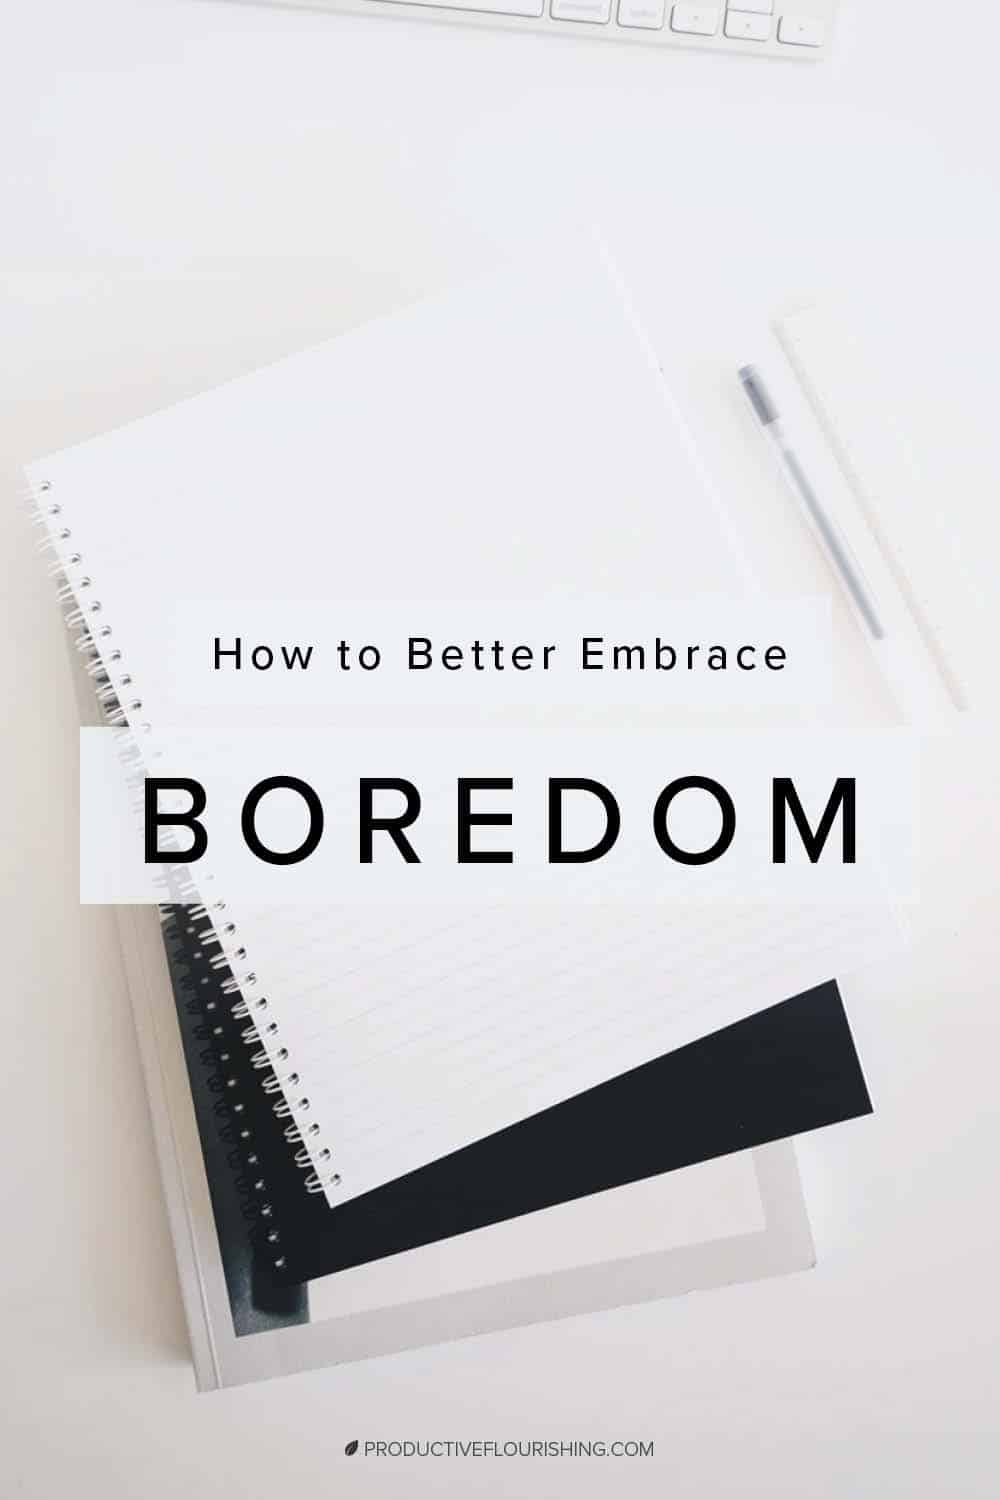 Read more about why boredom can be valuable in project management. Small businesses can benefit from using the tedious times in projects in four ways. Look for connections and patterns in the slow times. #entrepreneurship #projectmanagement #productiveflourishing